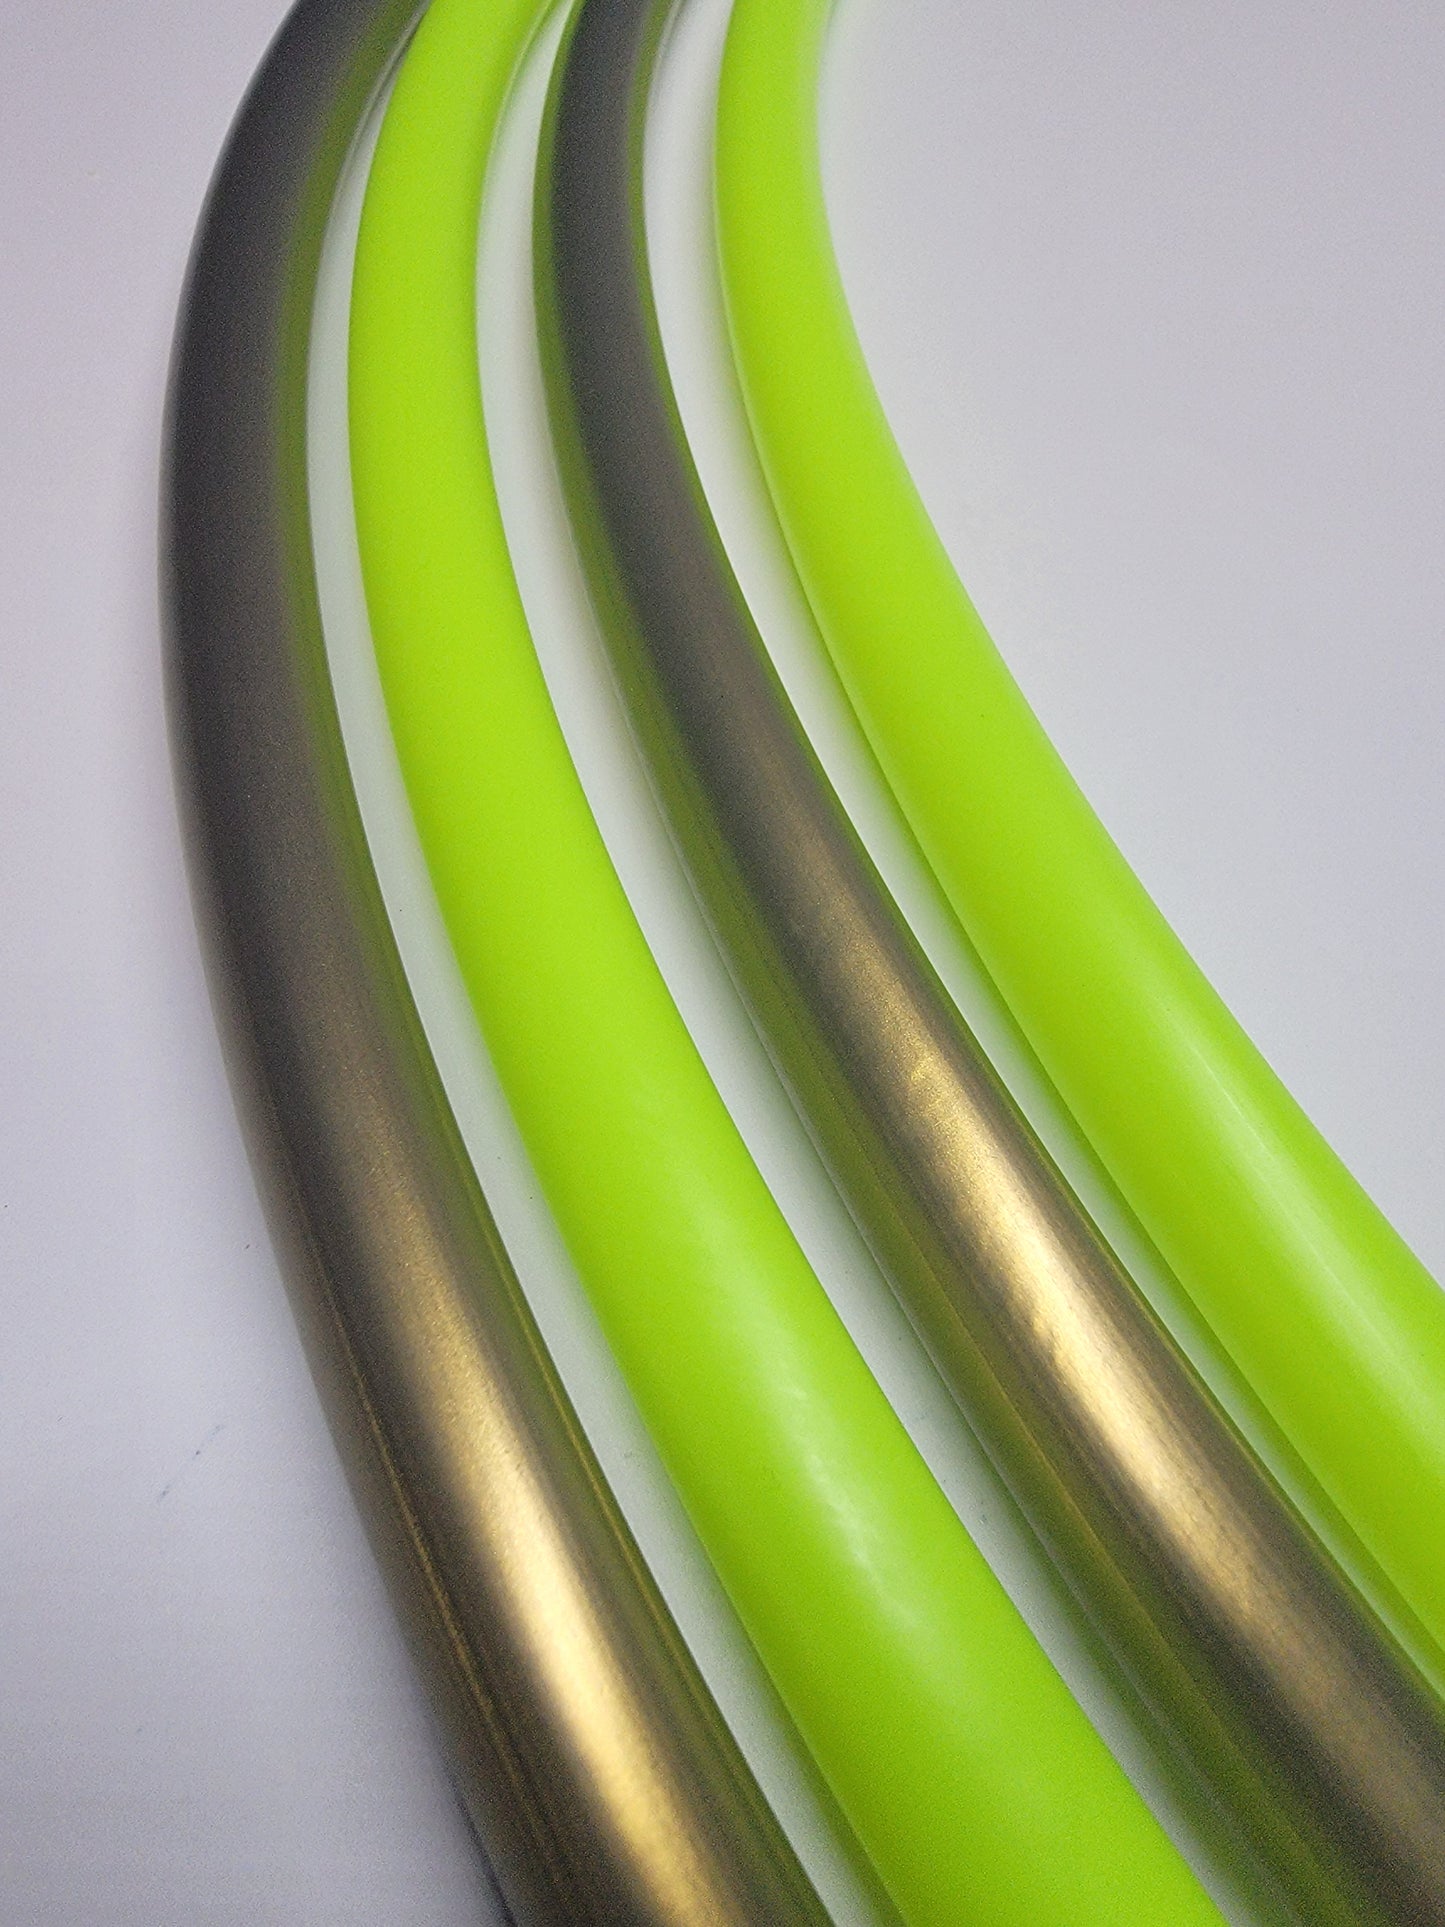 UV Coconut Lime & Egyptian Gold Sectional Hoop